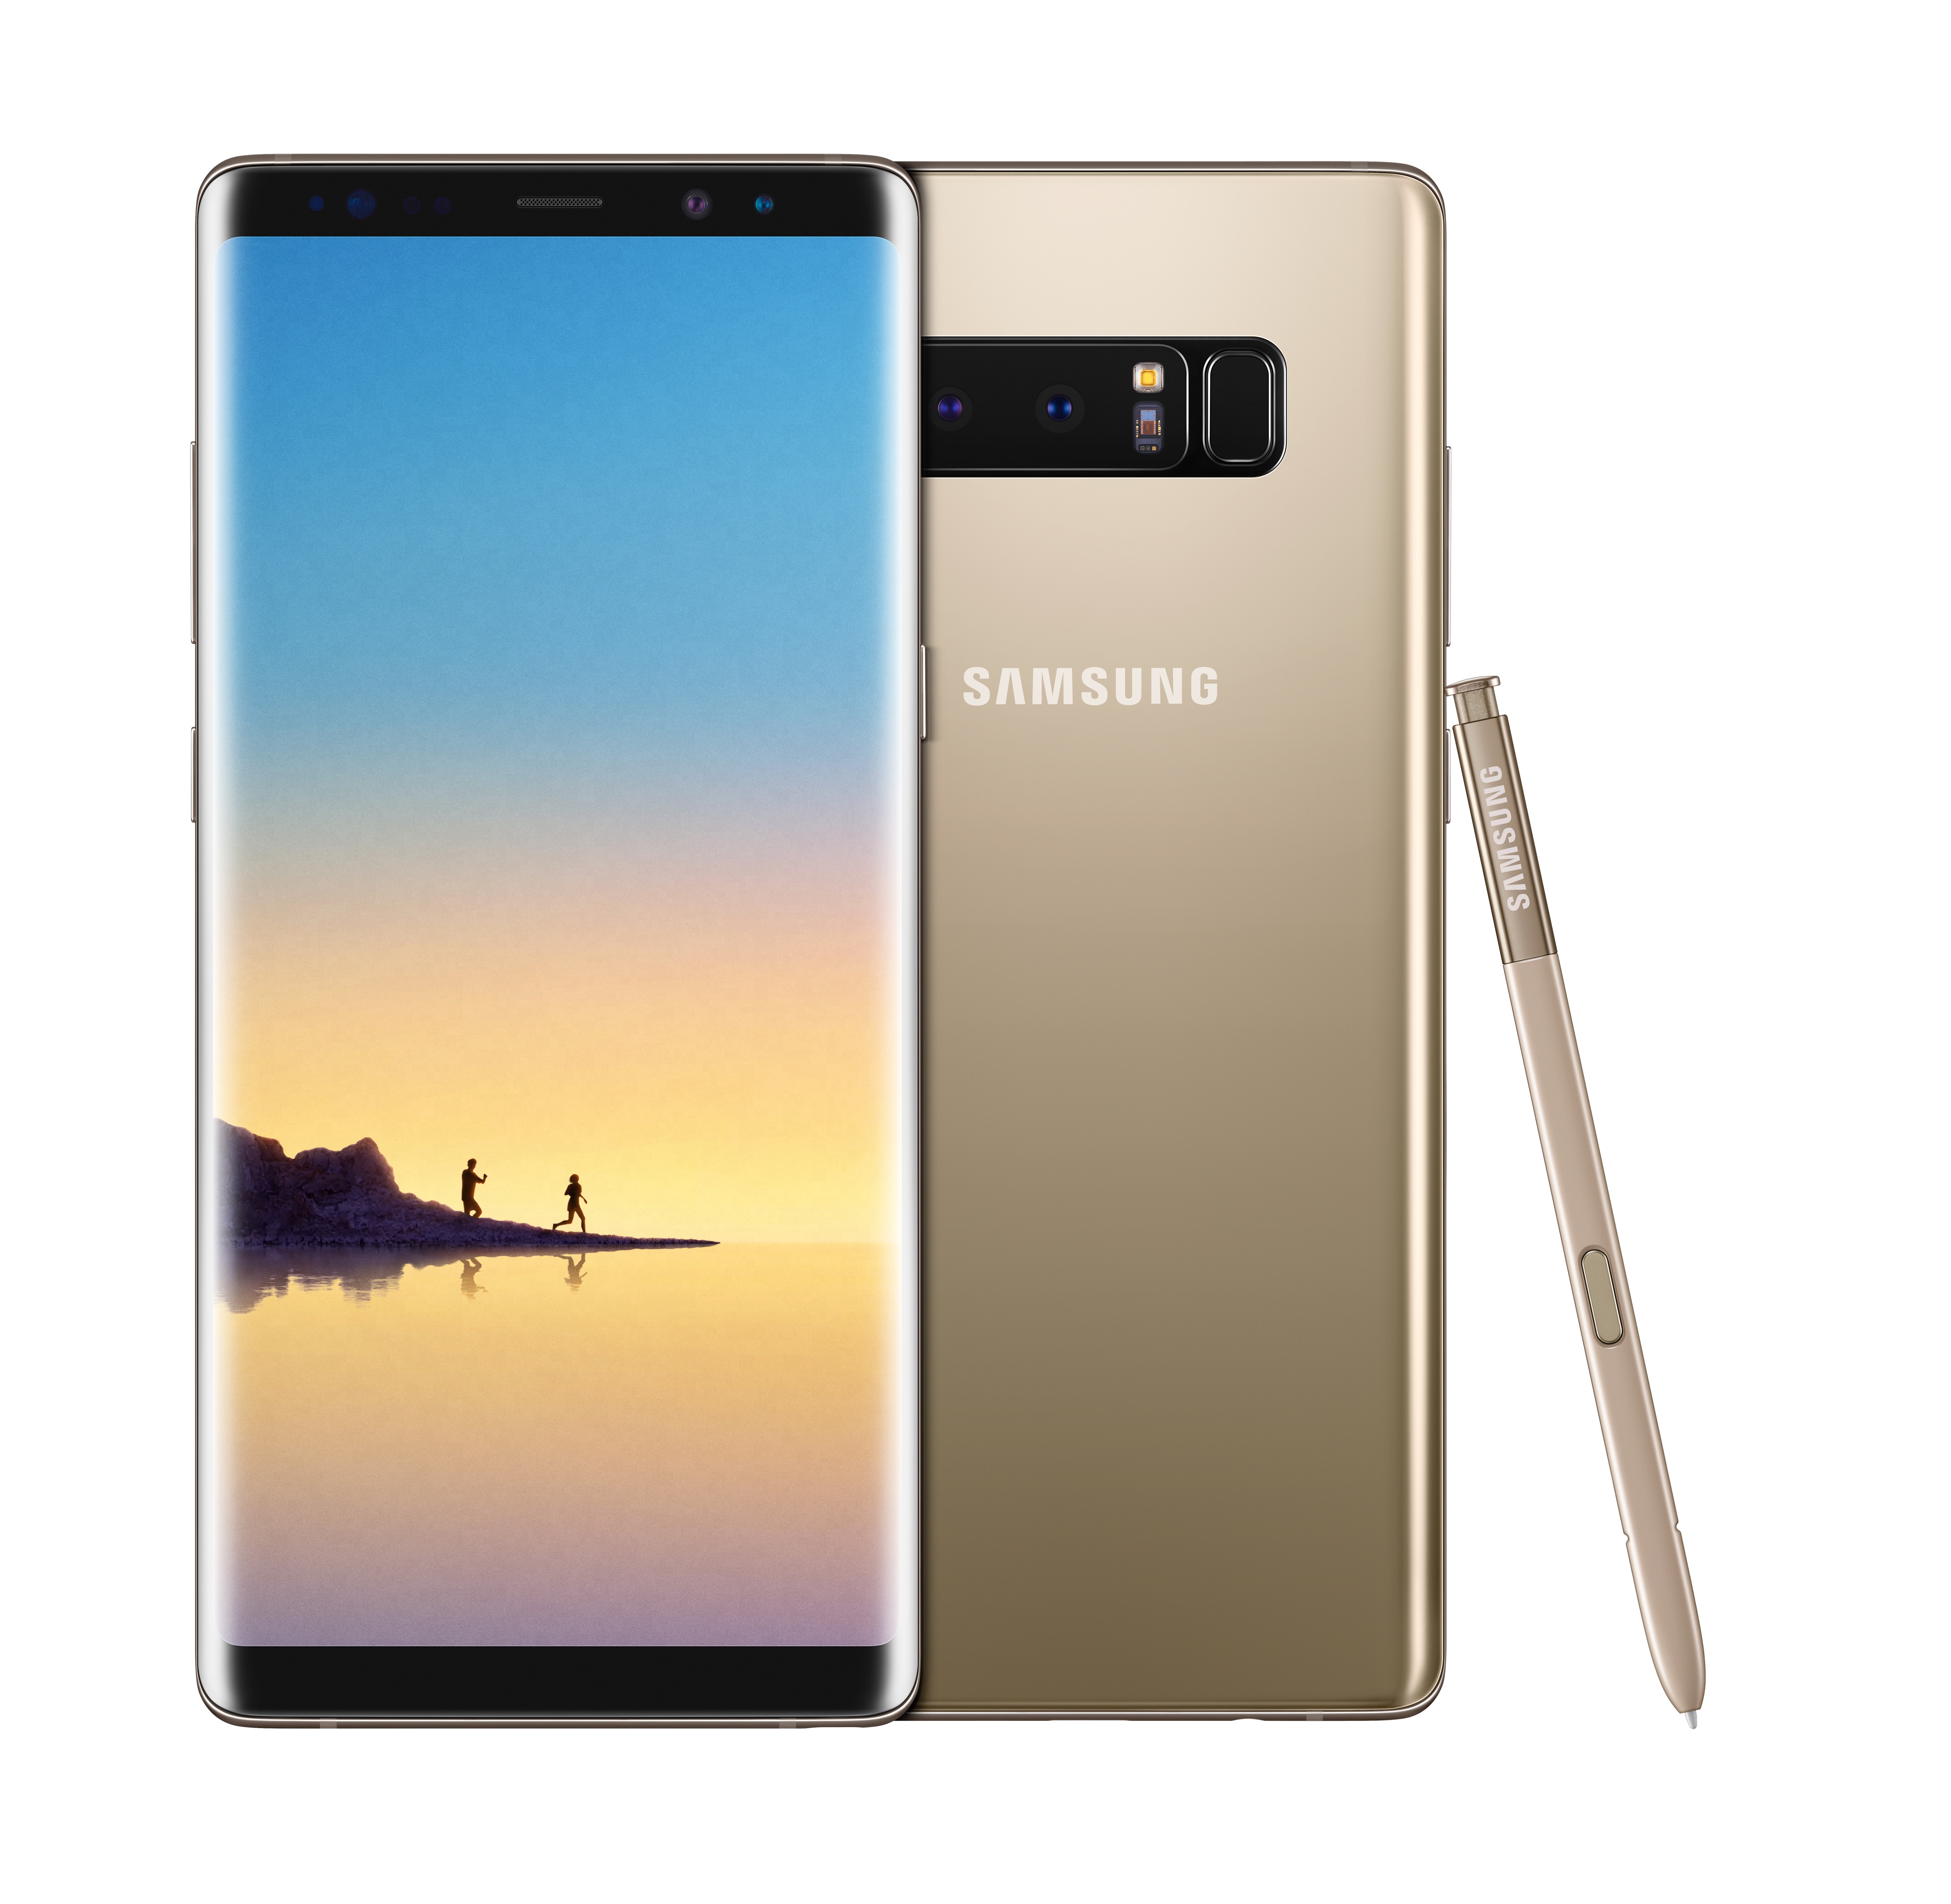 Samsung Galaxy Note 8 buy smartphone, compare prices in stores. Samsung ...